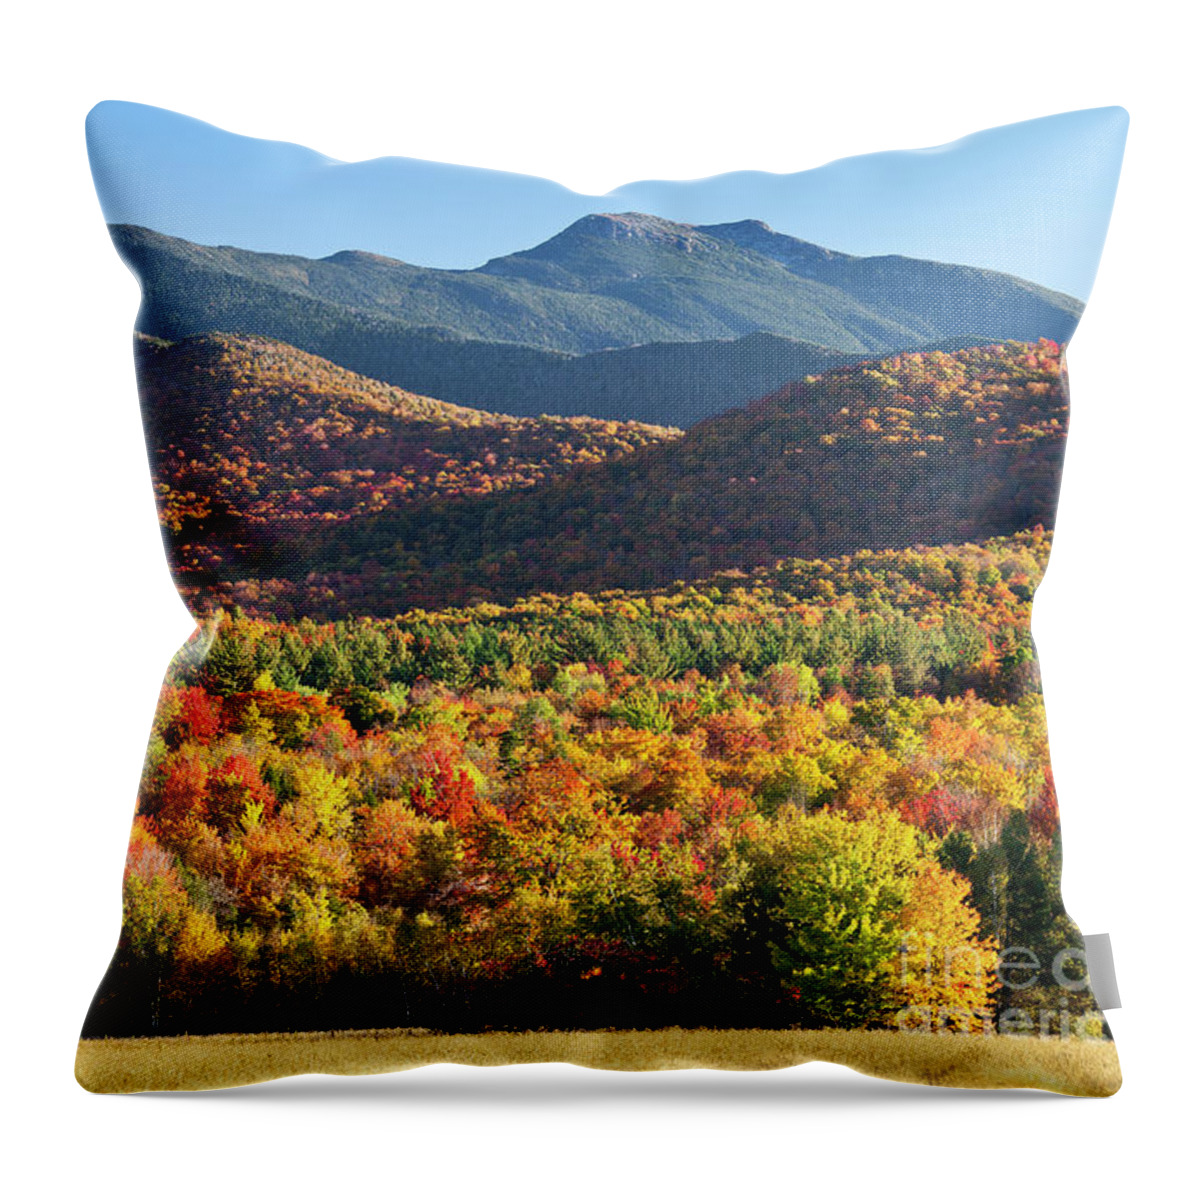 Fall Throw Pillow featuring the photograph Mount Mansfield Fall by Alan L Graham